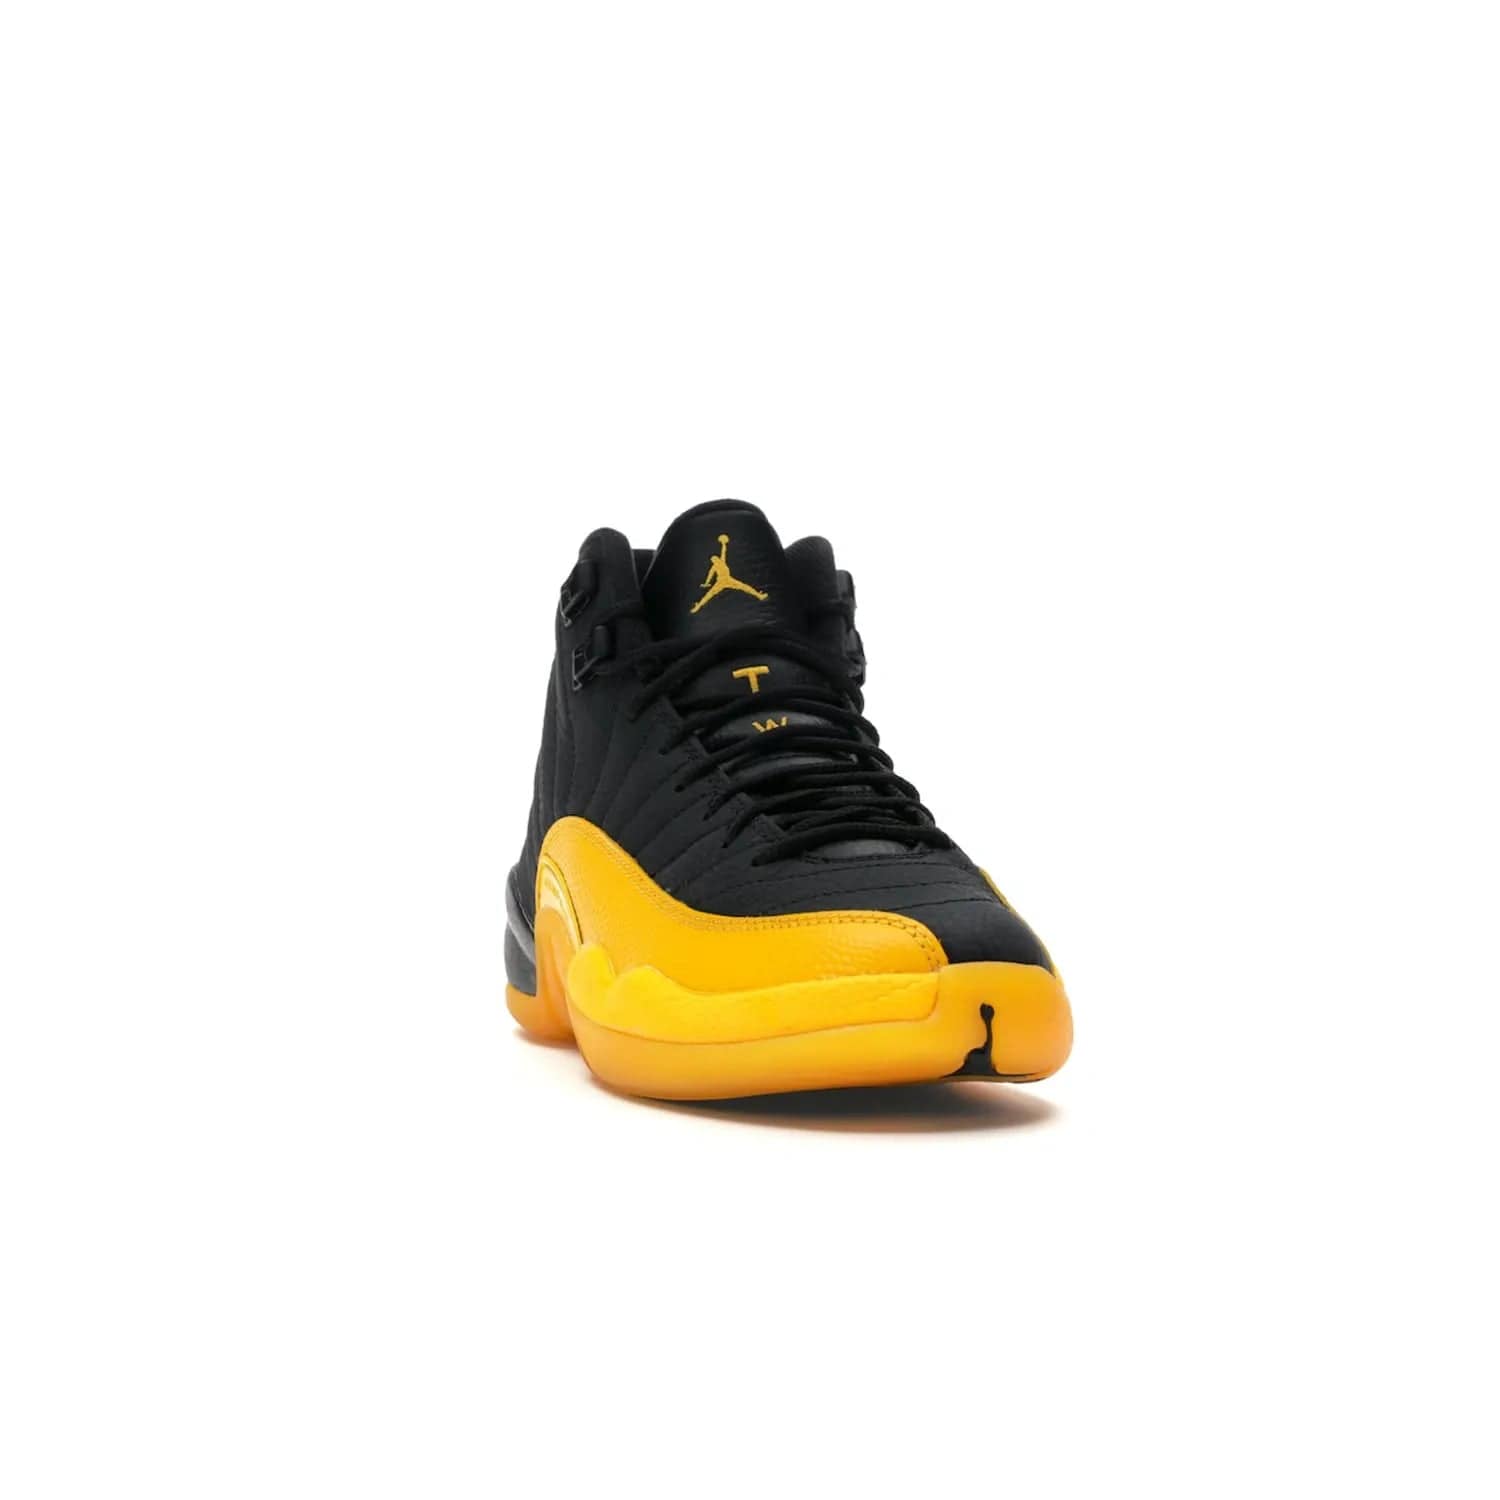 Jordan 12 Retro Black University Gold (GS) - Image 8 - Only at www.BallersClubKickz.com - Upgrade your kid's shoe collection with the Jordan 12 Retro Black University Gold. With classic style, black tumbled leather upper, and University Gold accents, it's a great summer look. Out July 2020.